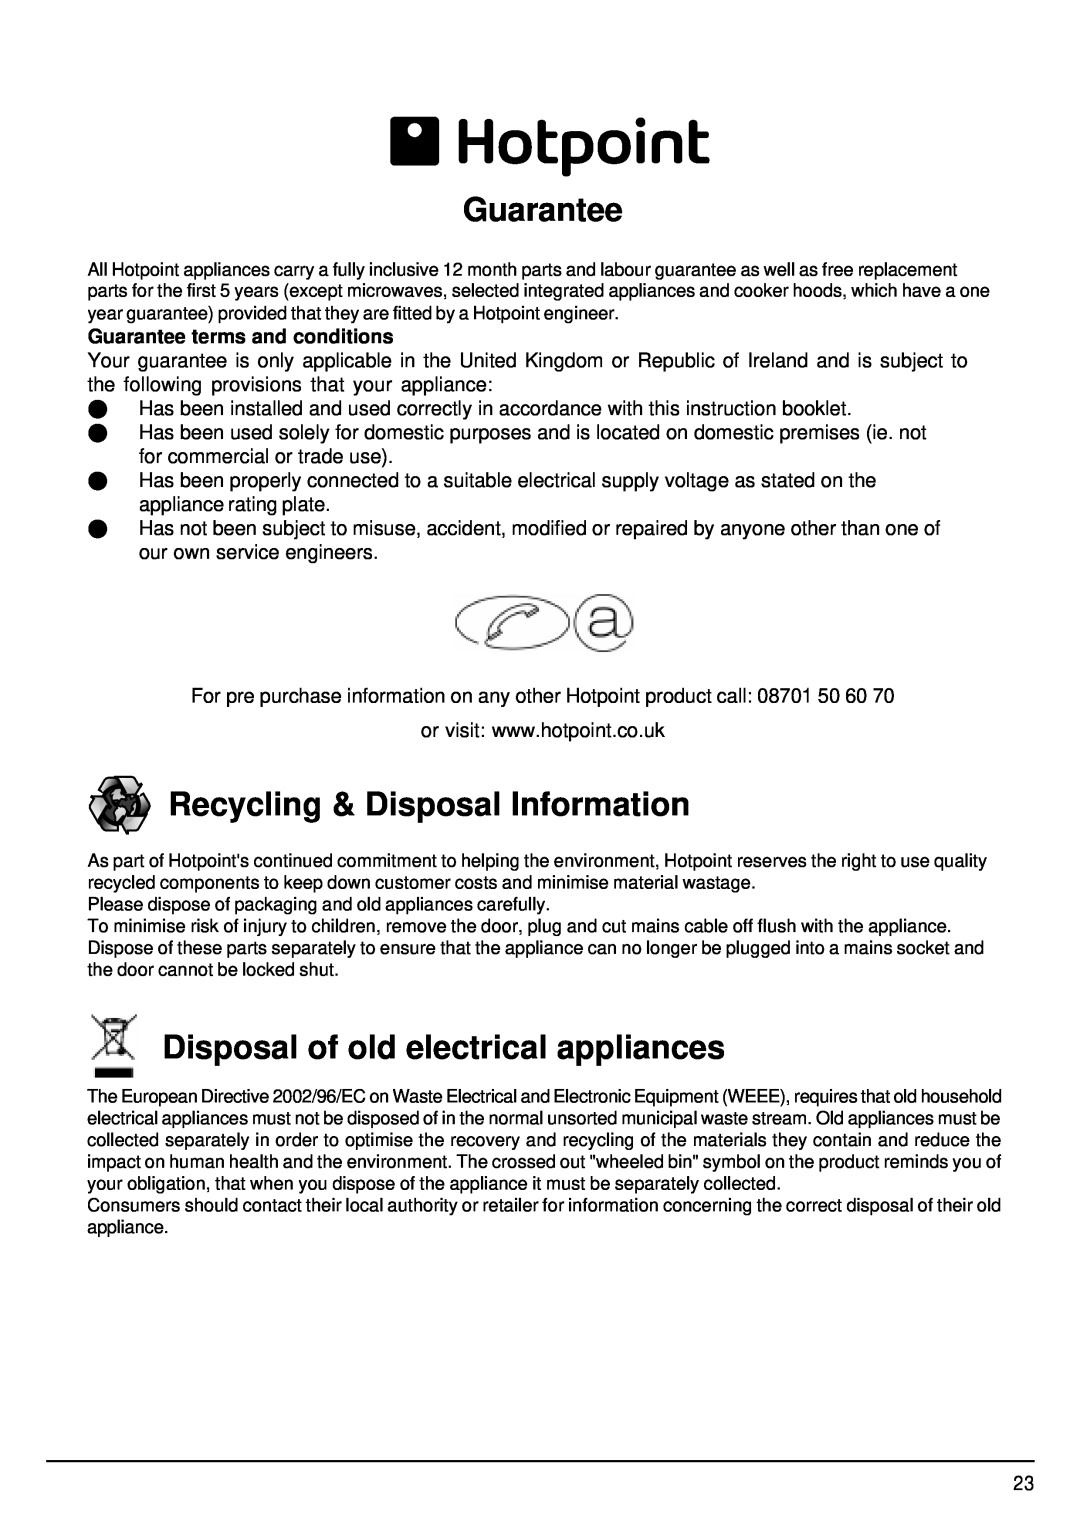 Hotpoint ULTIMA manual Guarantee, Recycling & Disposal Information, Disposal of old electrical appliances 